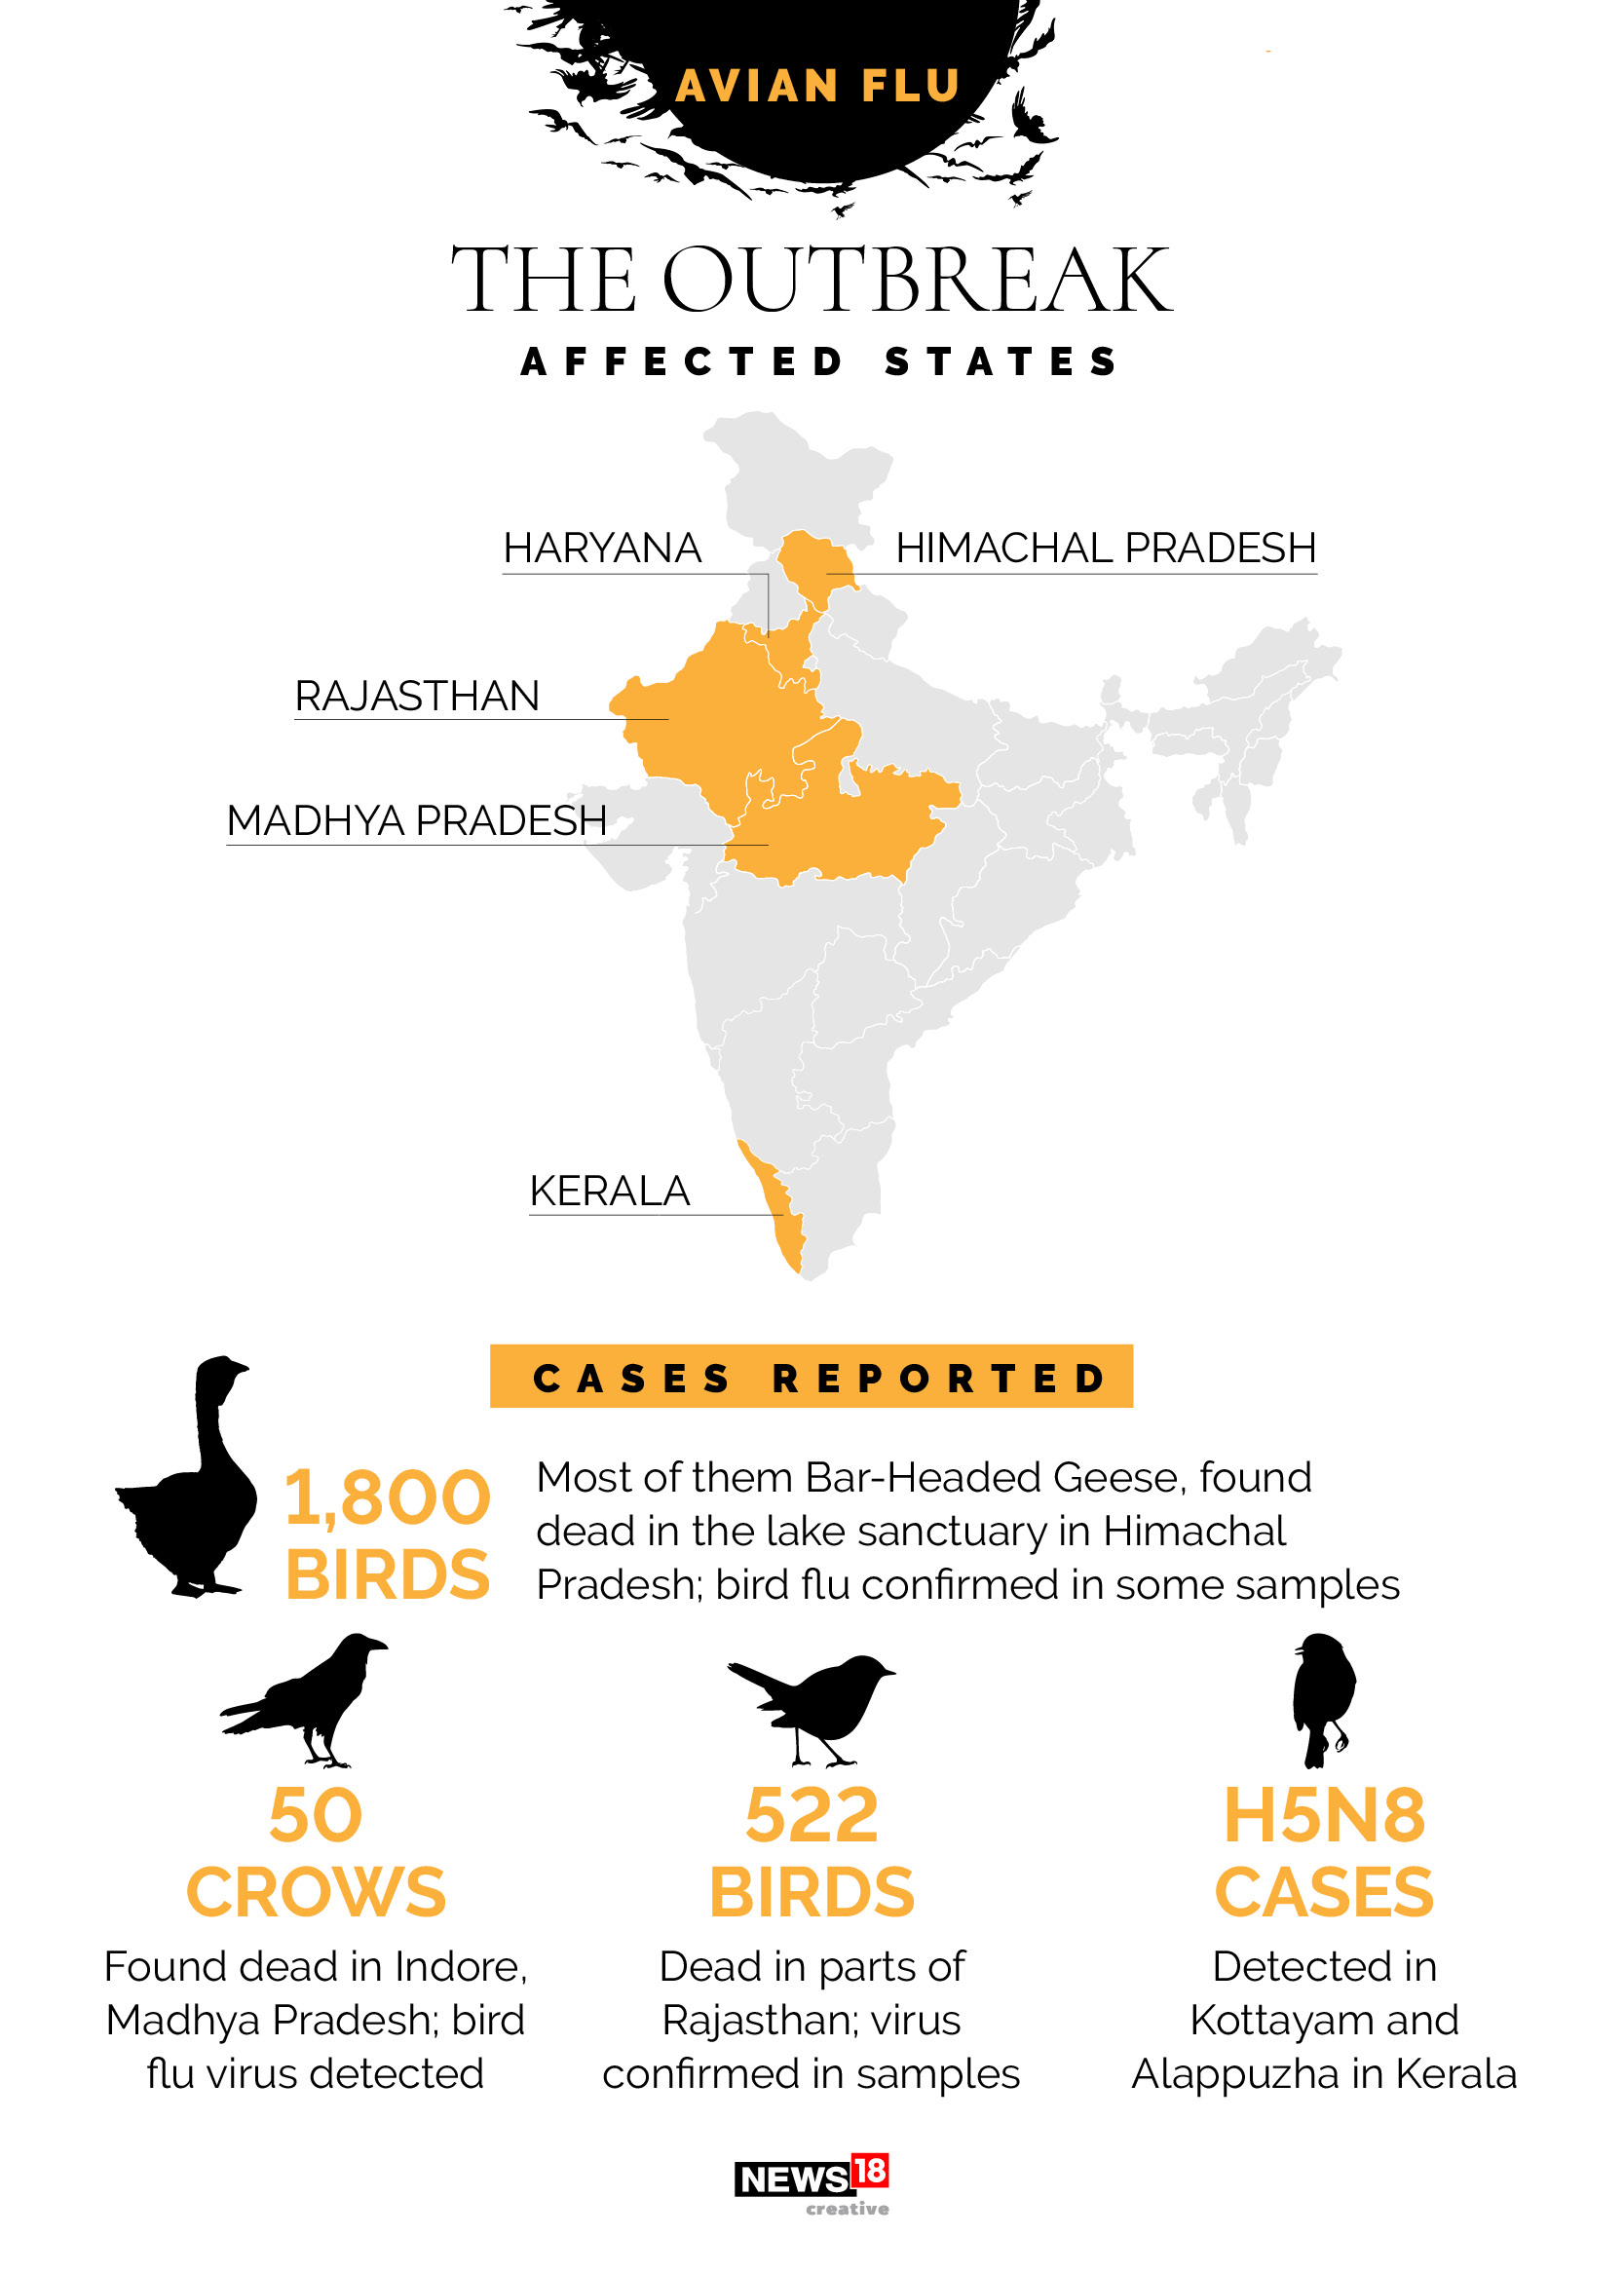 News By Numbers: What we know about Avian Flu that has killed over 2,000 birds